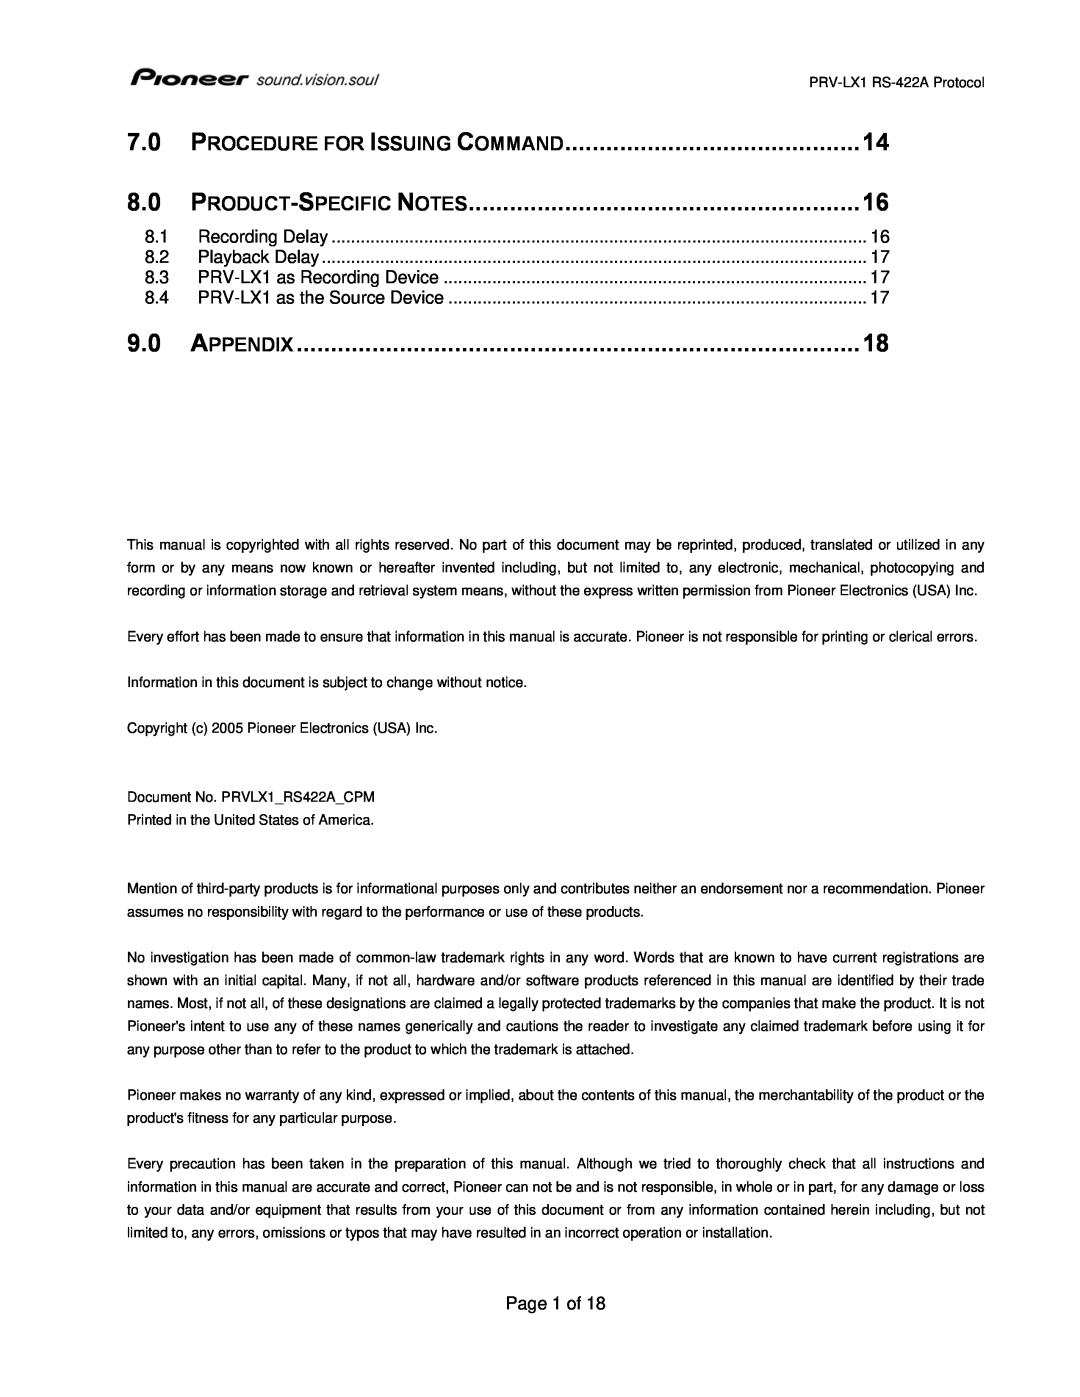 Pioneer PRV-LX1 manual Procedure For Issuing Command, Page 1 of, Product-Specific Notes 